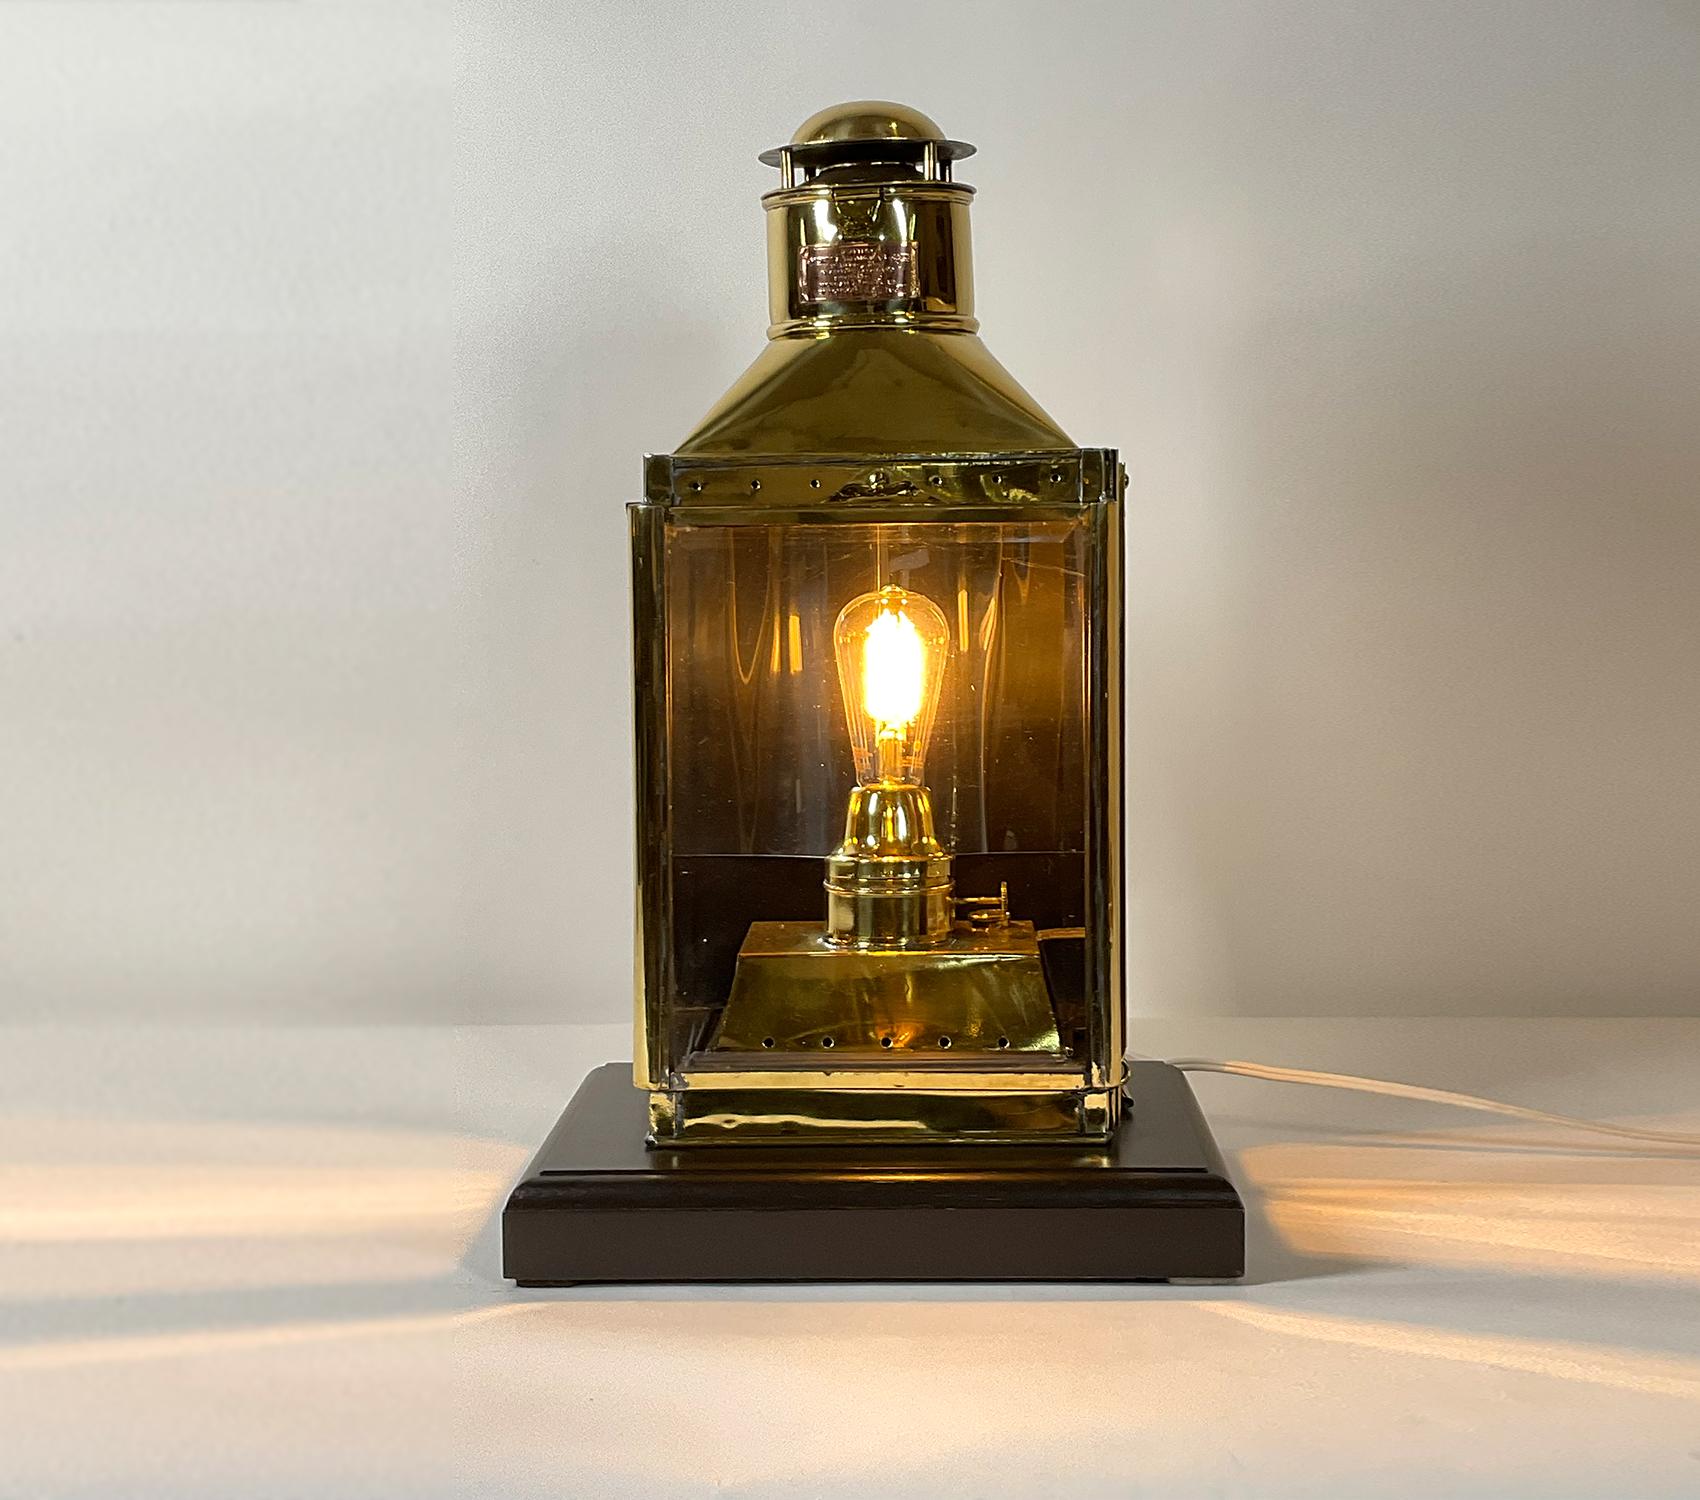 Solid brass cabin lantern from a yacht. Meticulously polished and lacquered. Fitted with a copper maker’s plate bearing maker’s name Emory Douglas Co. LTD. St James Street Glasgow Scotland, successors to Morgan and Weers of London. With hinged door